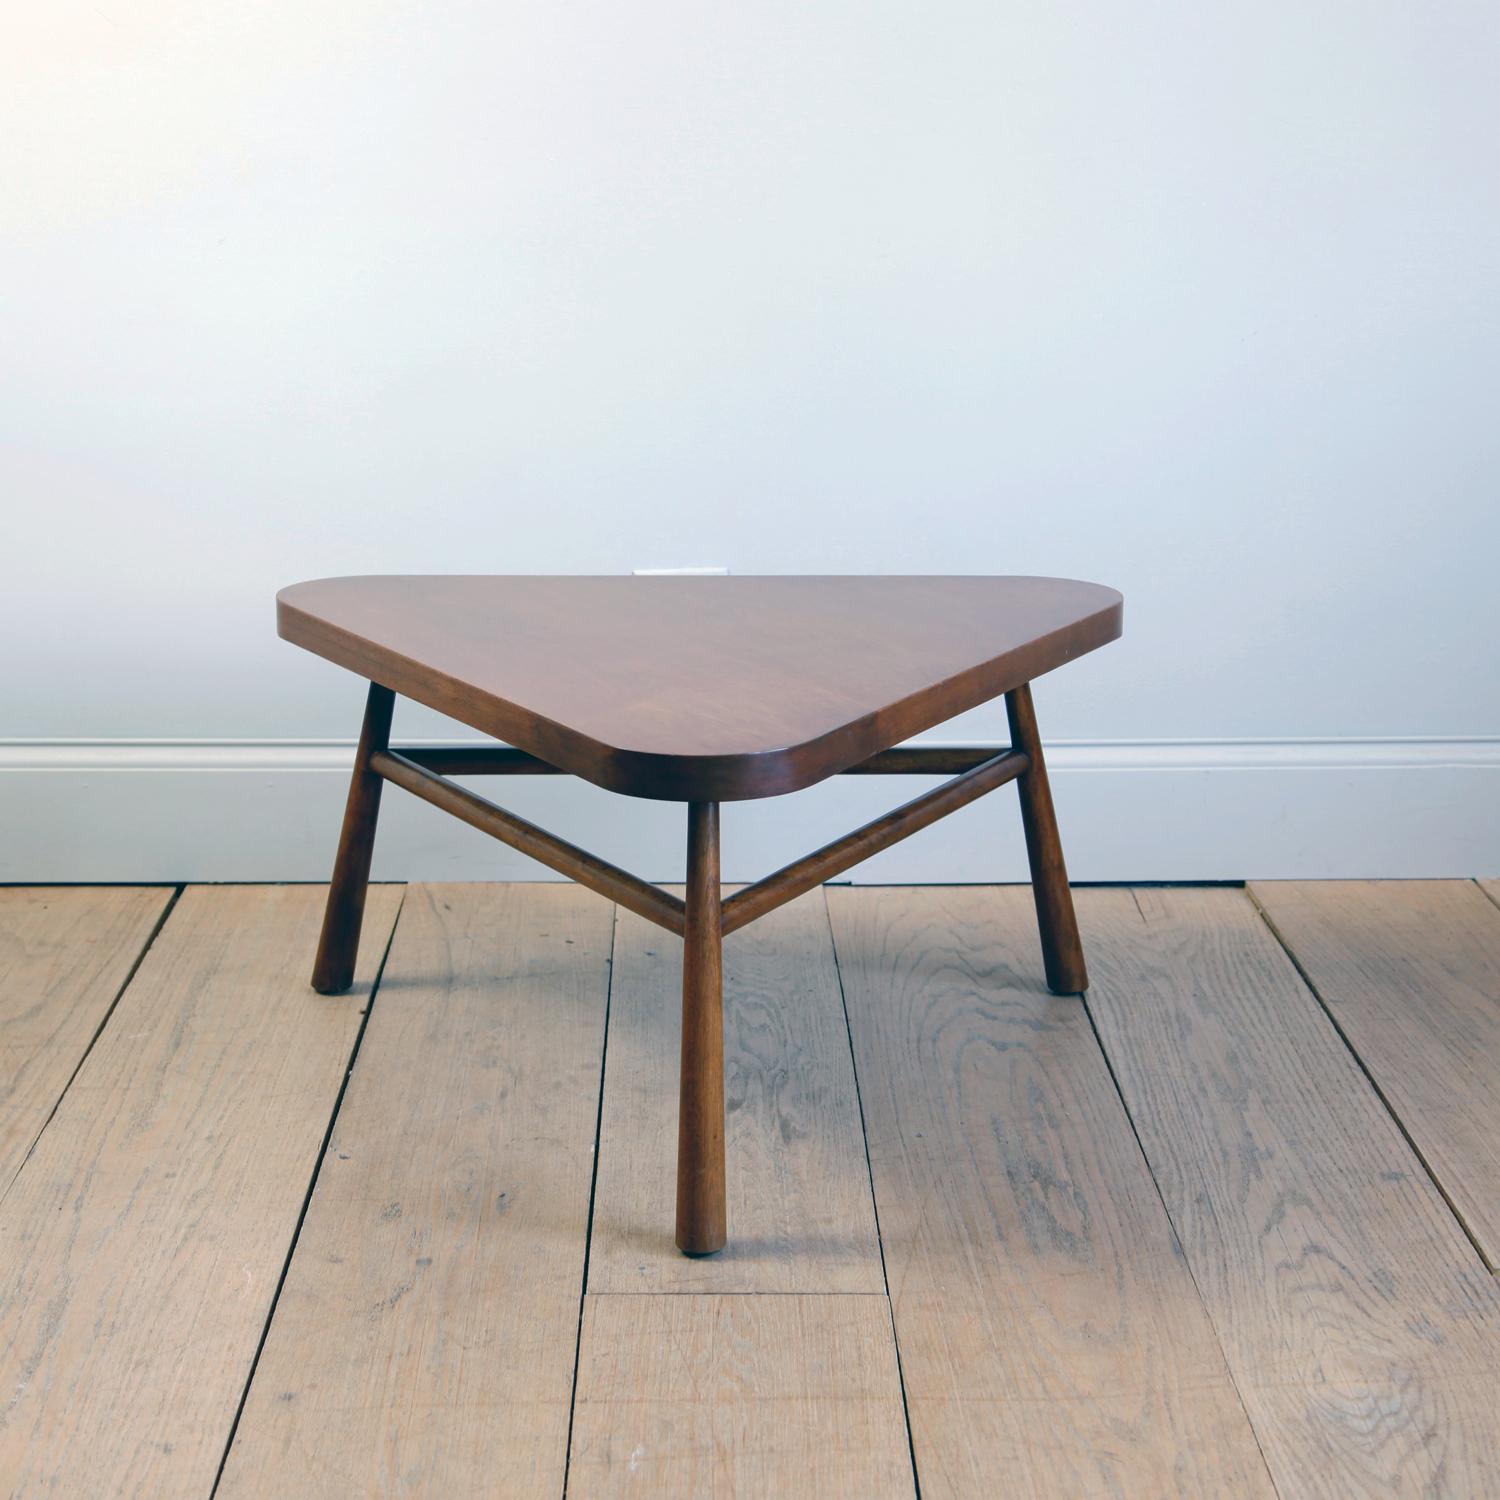 An Asian-inspired design. The three legs subtly flare in diameter, and are splayed out. There is a pleasing harmony and simplicity in the triangular profile.